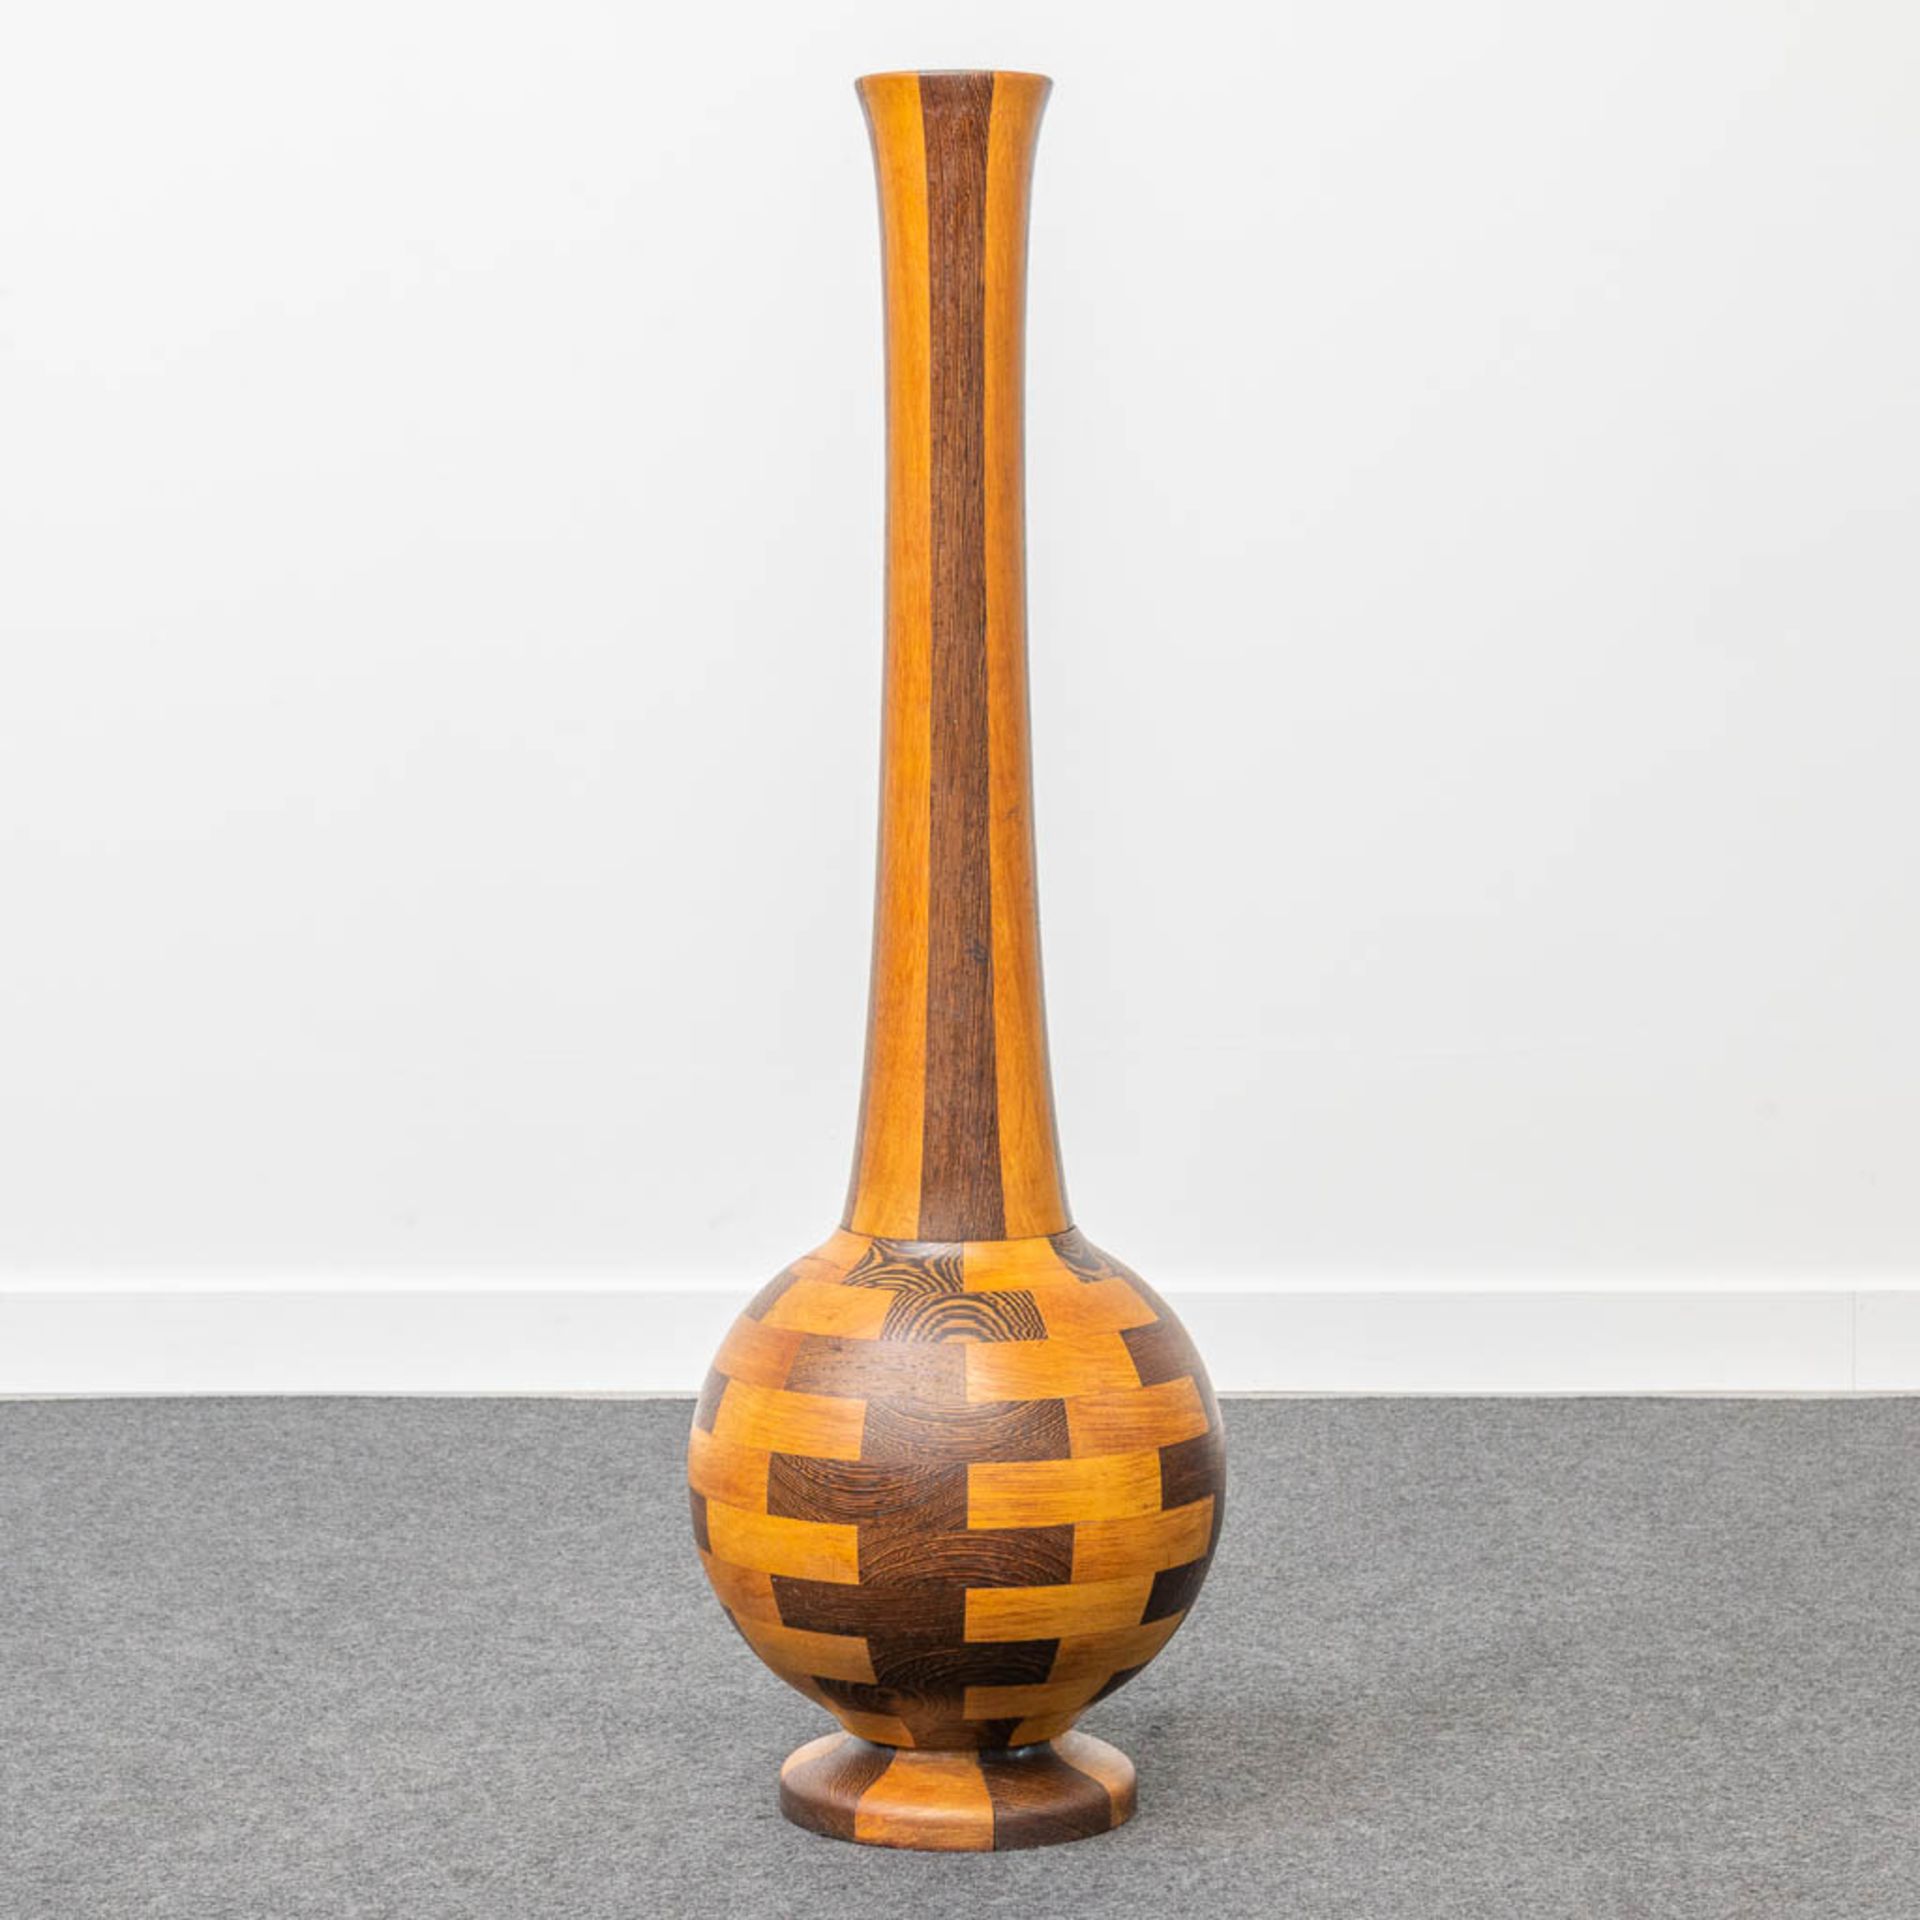 A collection of 4 wood-turned vases with inlay, made by DeCoene in Kortijk, Belgium. - Image 3 of 11